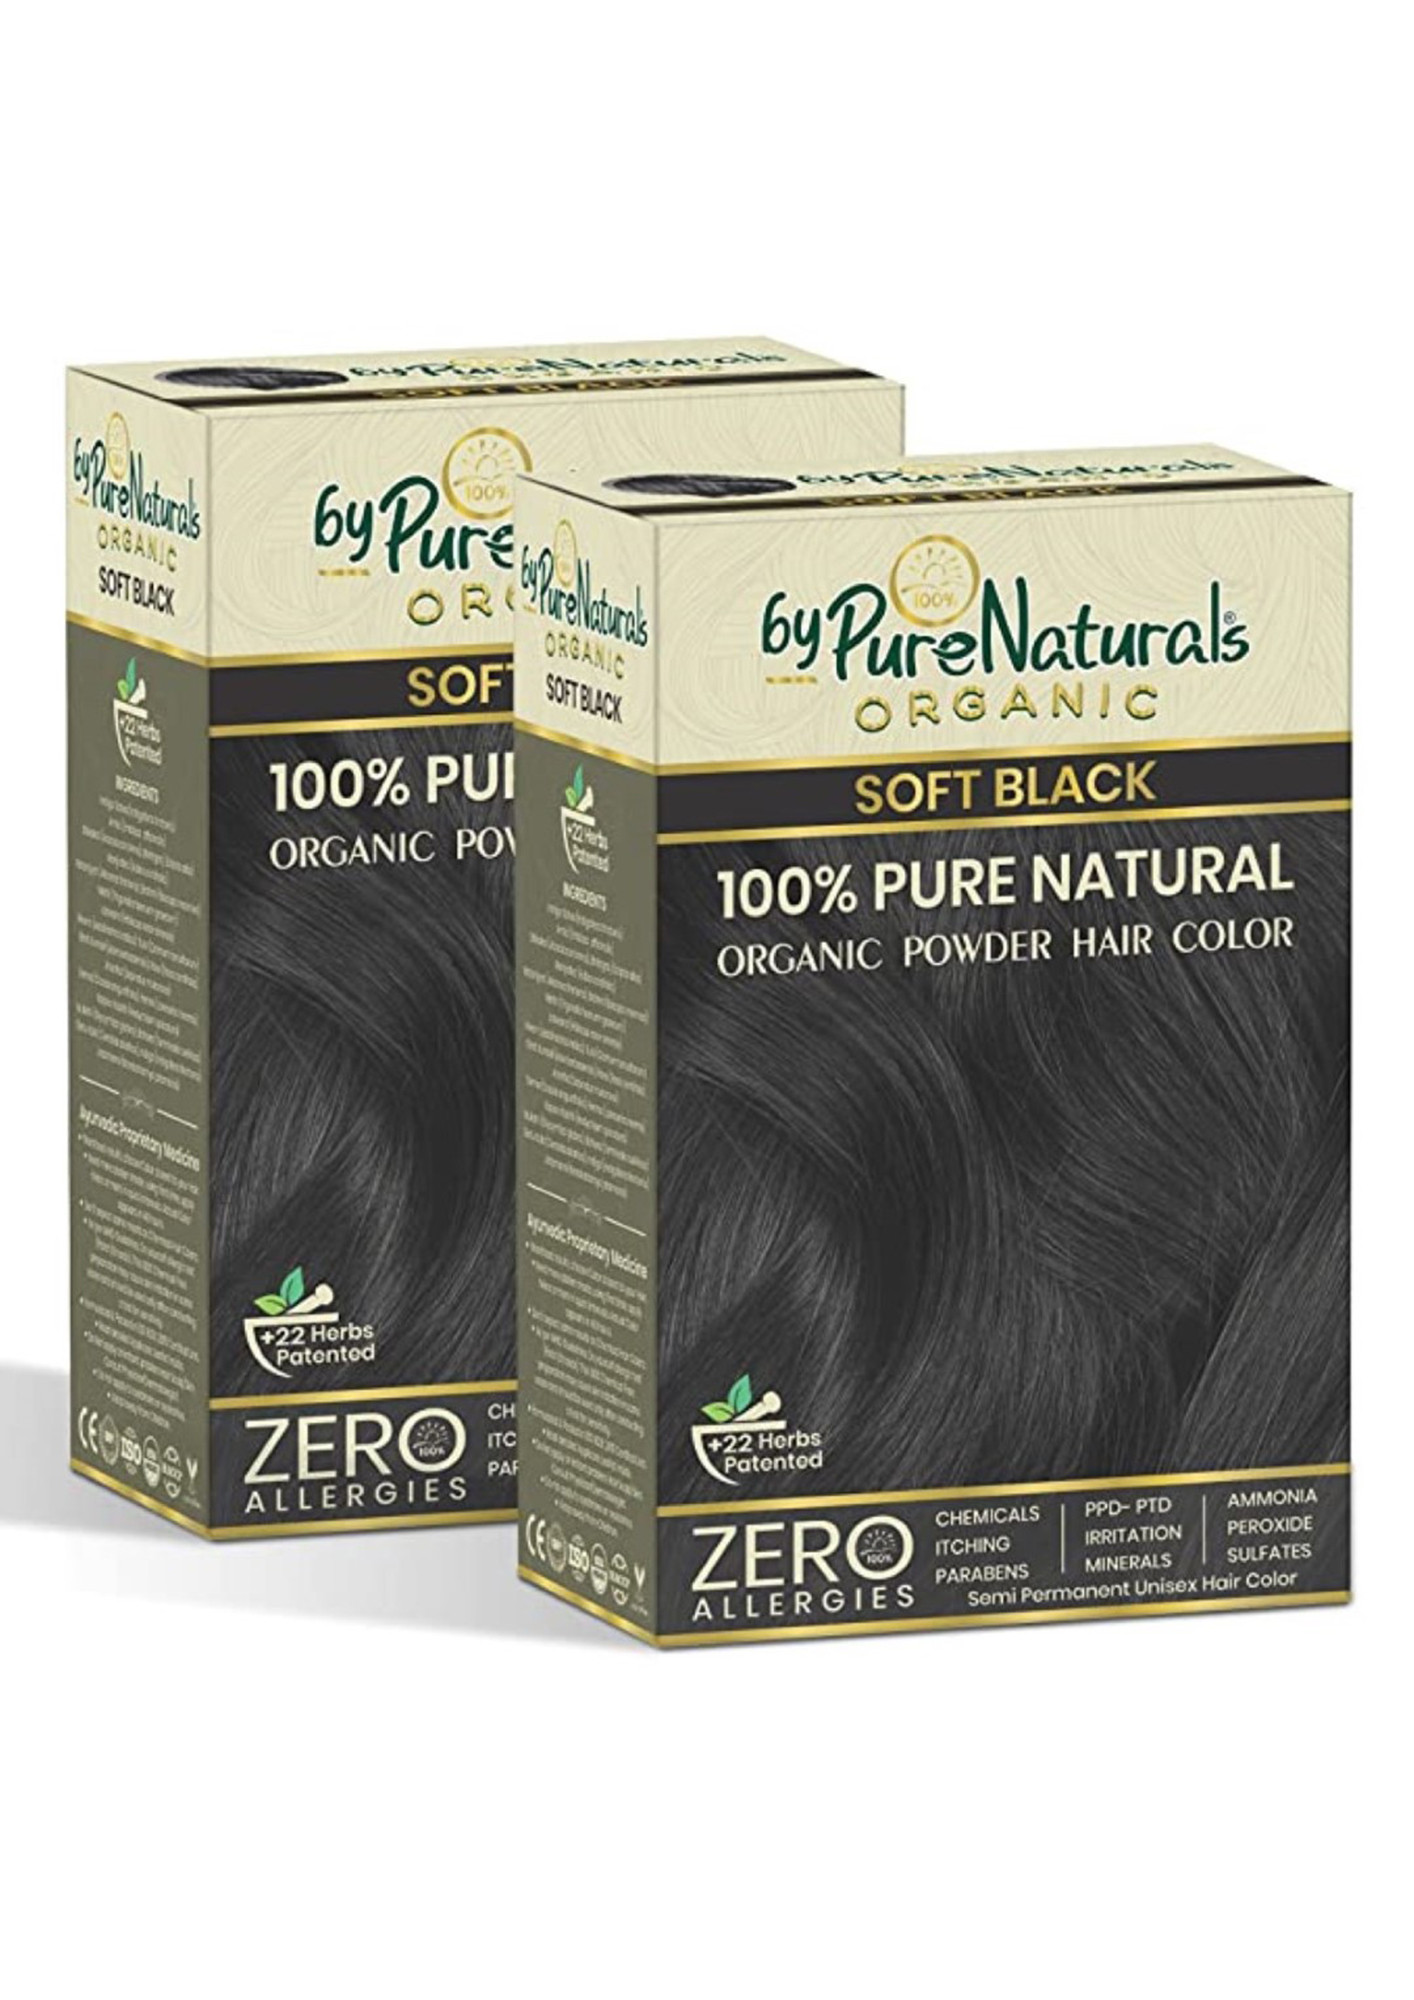 Indus Valley 24 Herbs Organic Hair Color Soft Black Buy box of 150 gm  Powder at best price in India  1mg